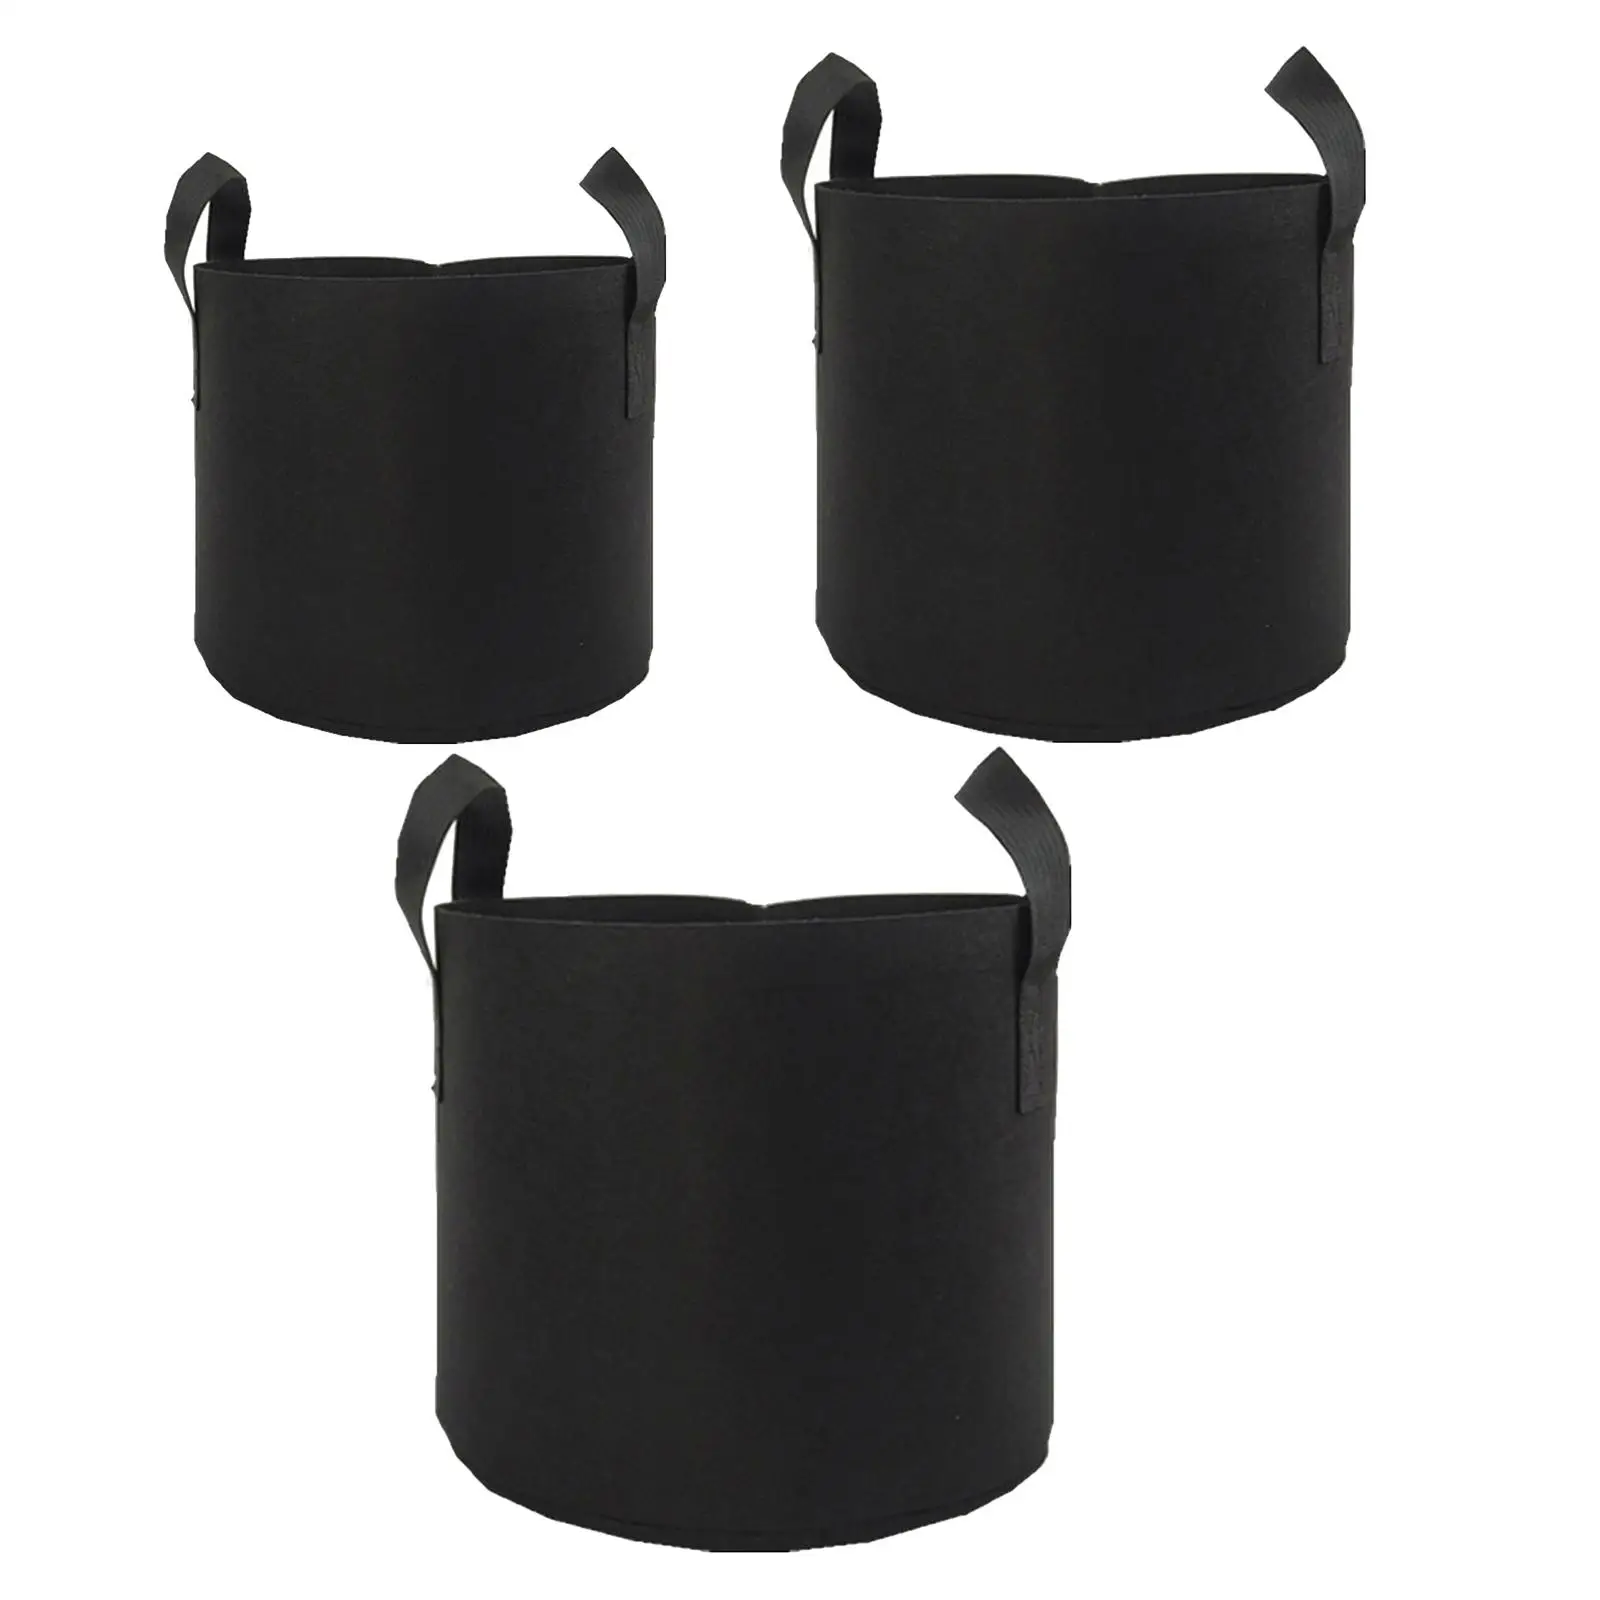 Large Bags w/Handles, Reinforced Non-Woven Planter Bags for Vegetables, Heavy Duty and durable Fabric Plant ing Bags